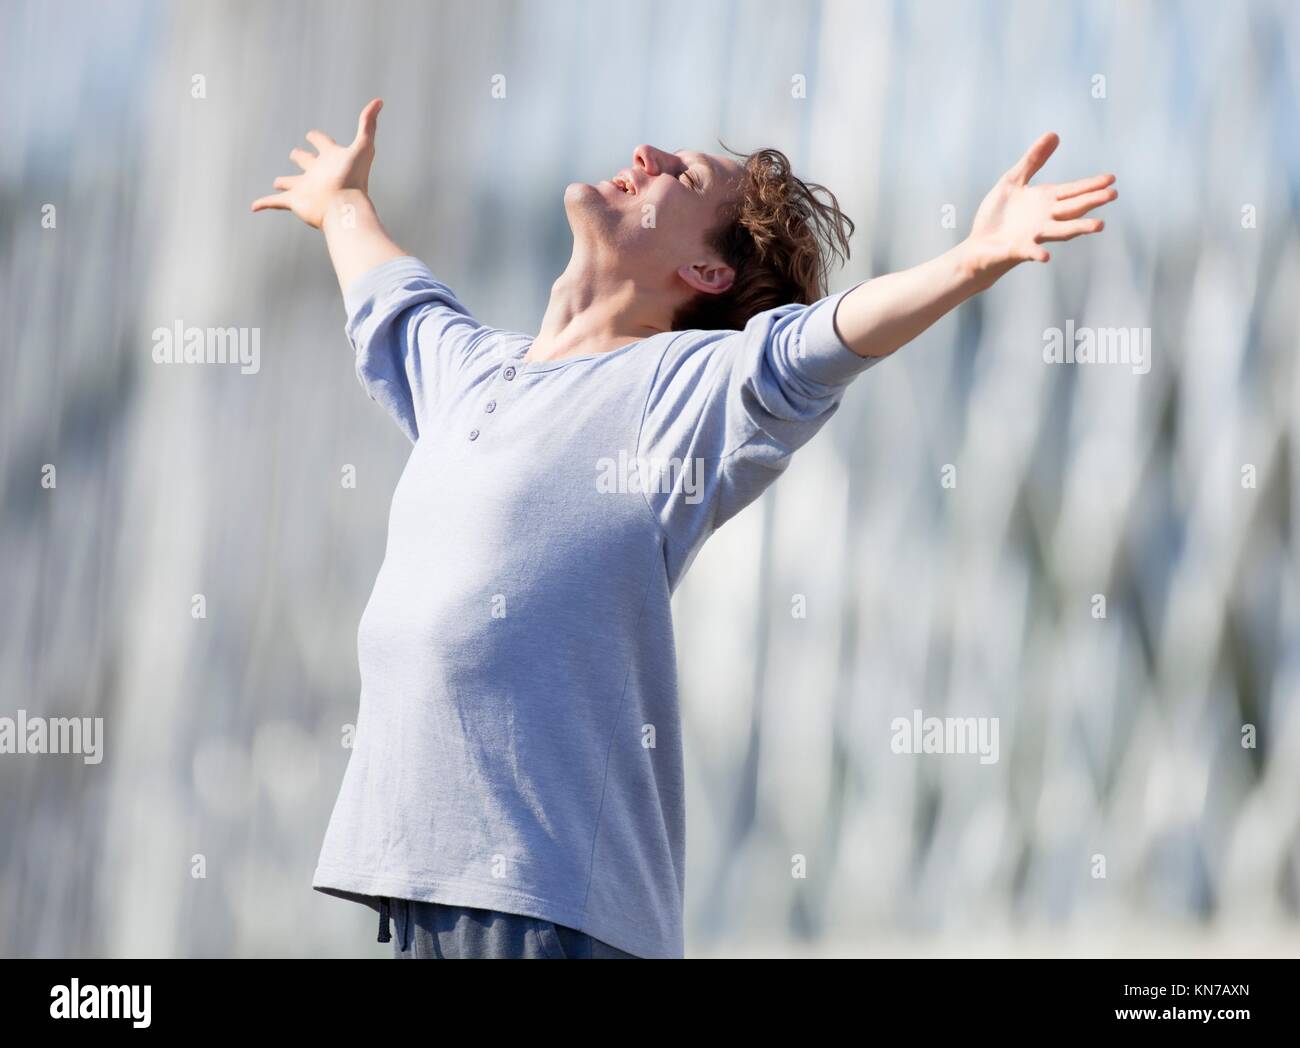 Excited Young Man Stretching out his Arm in Emotion Outdoors. Stock Photo